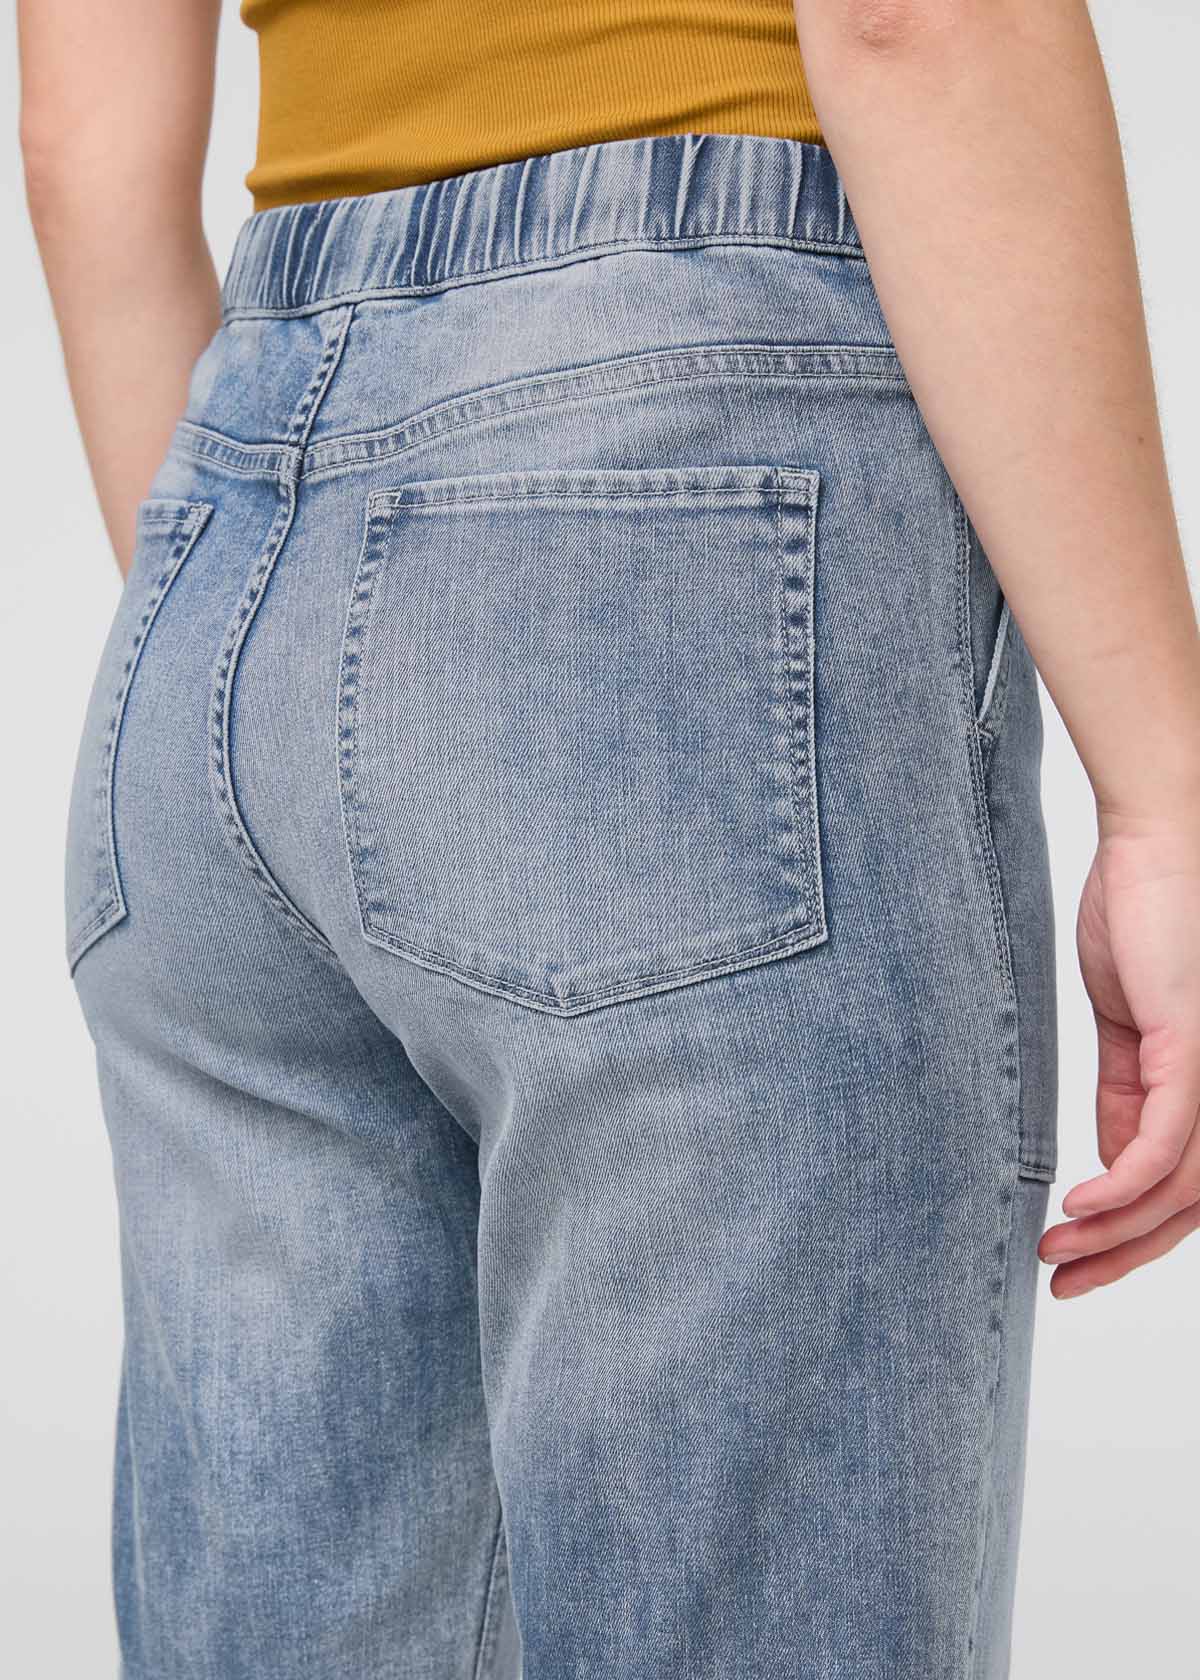 womens faded blue relaxed pull on denim pants back waistband detail